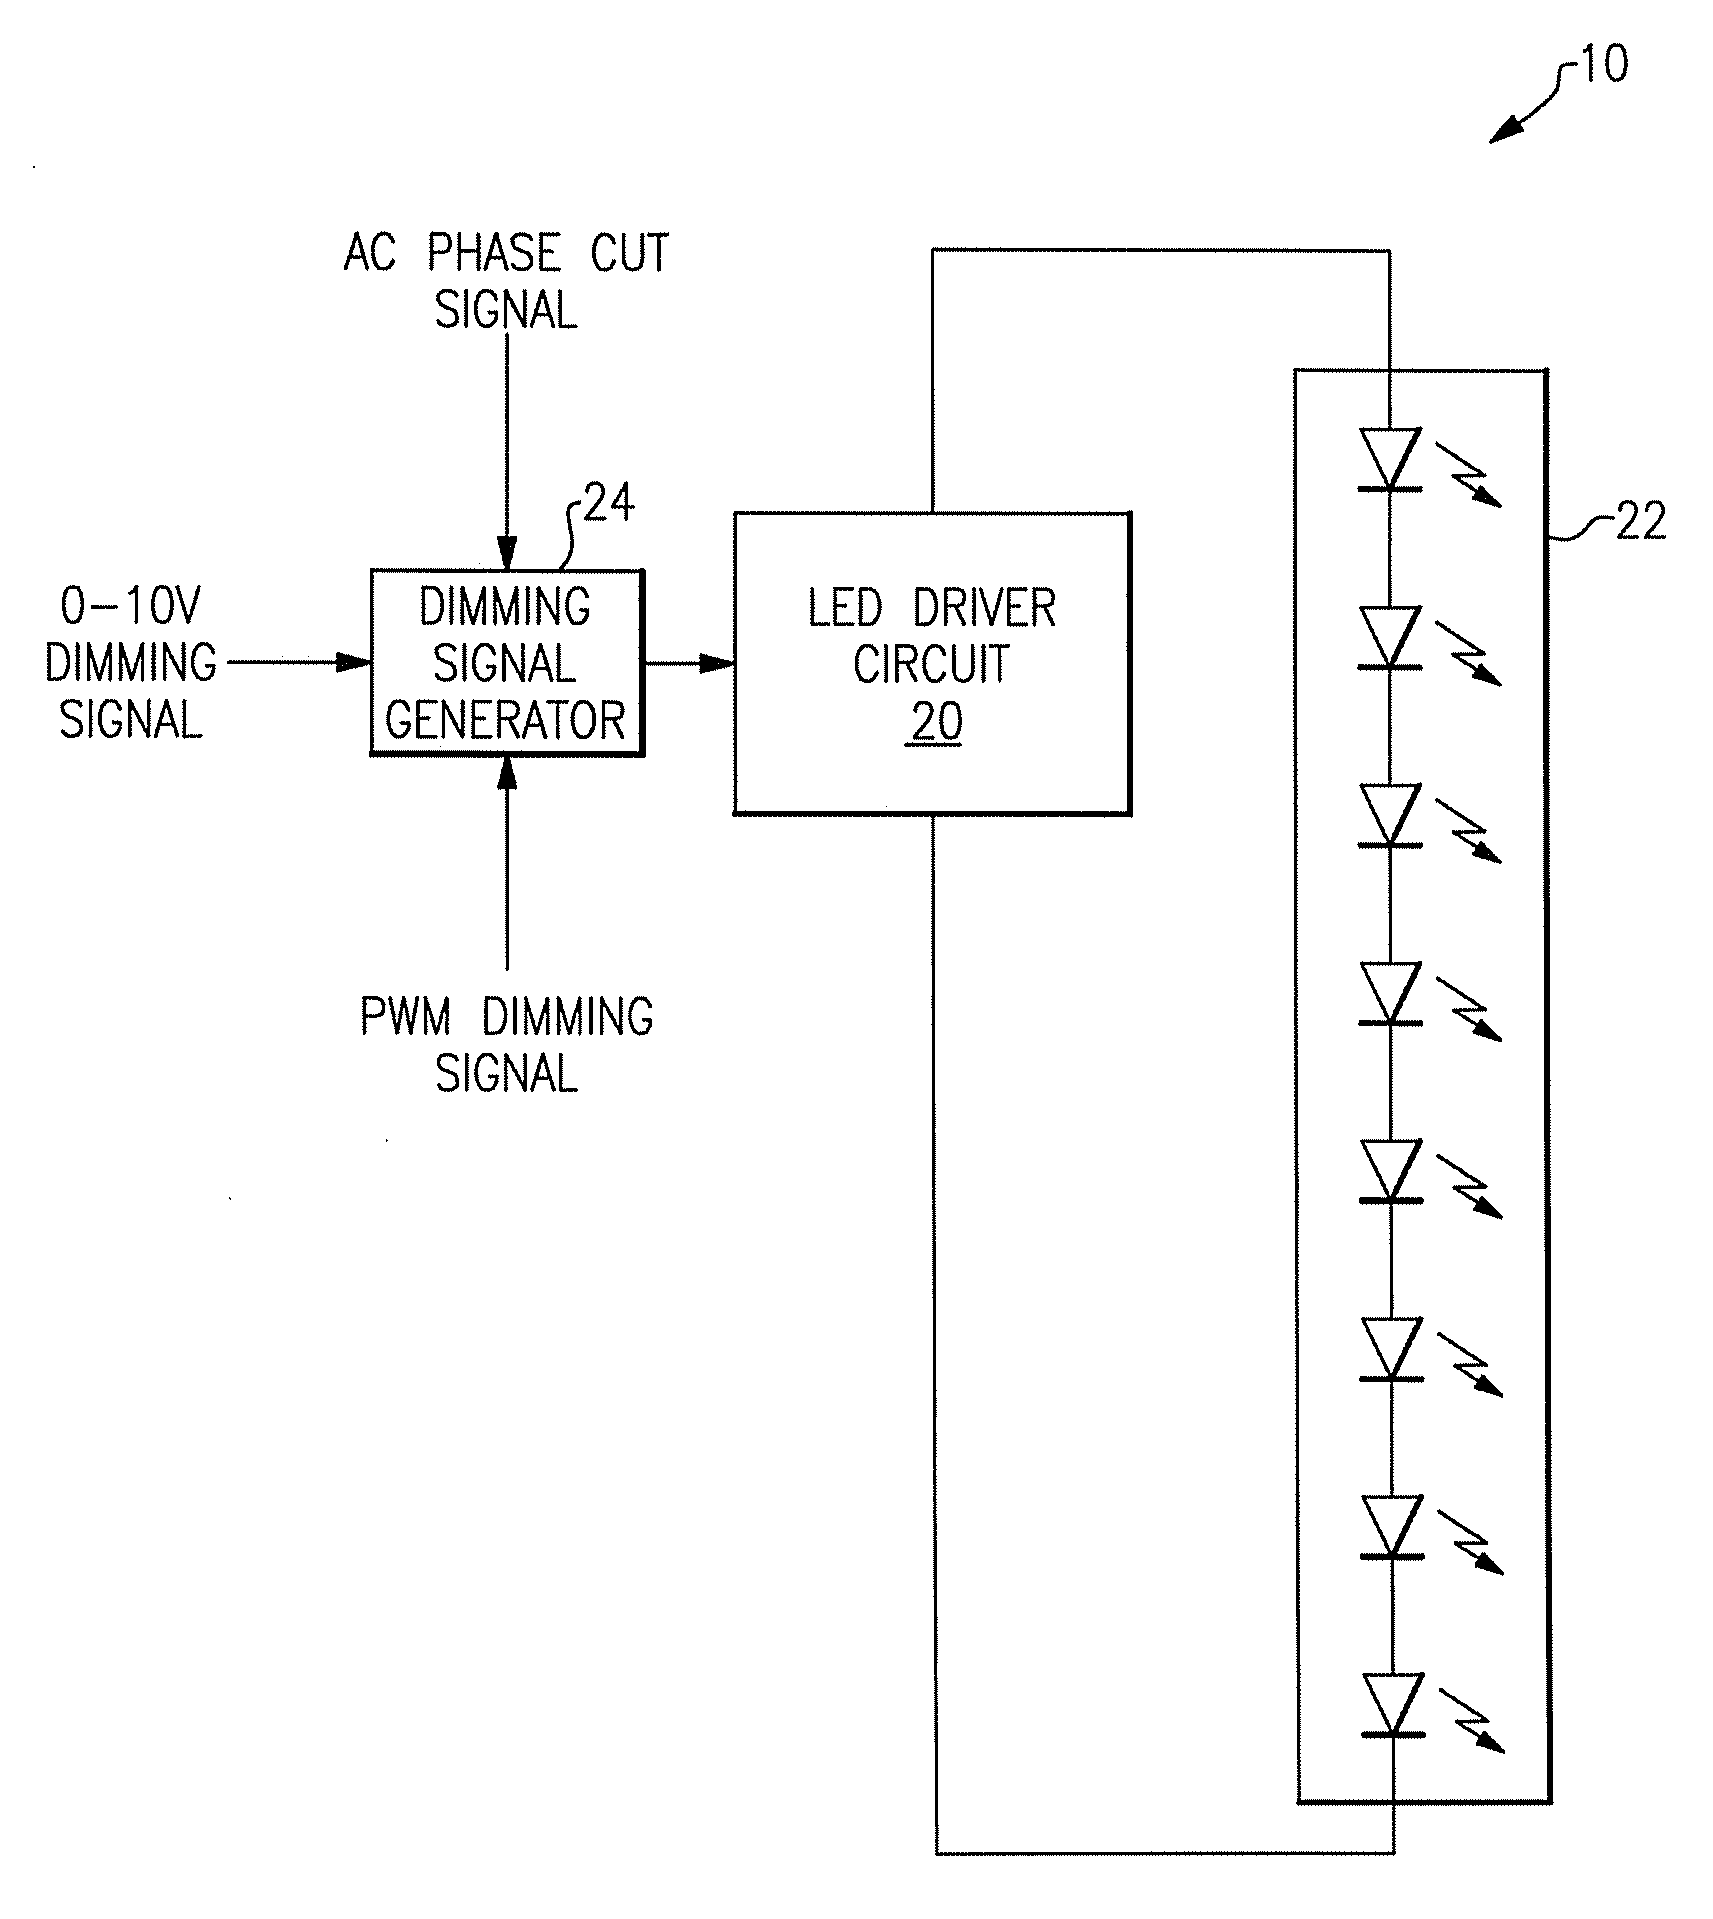 Dimming signal generation and methods of generating dimming signals